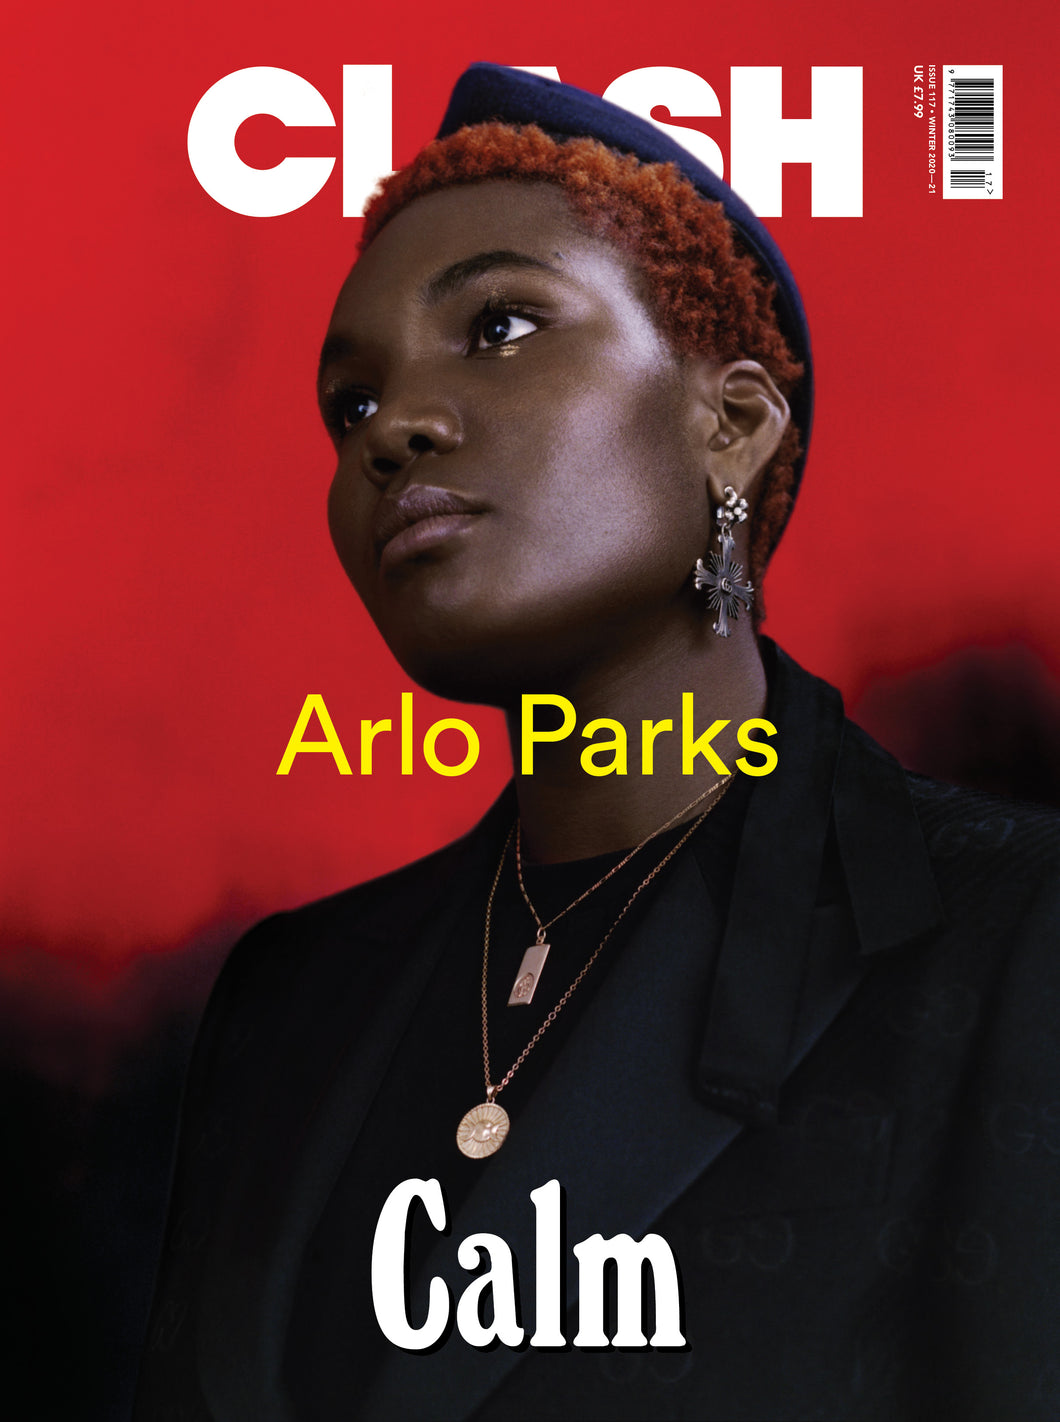 Issue 117 - Arlo Parks